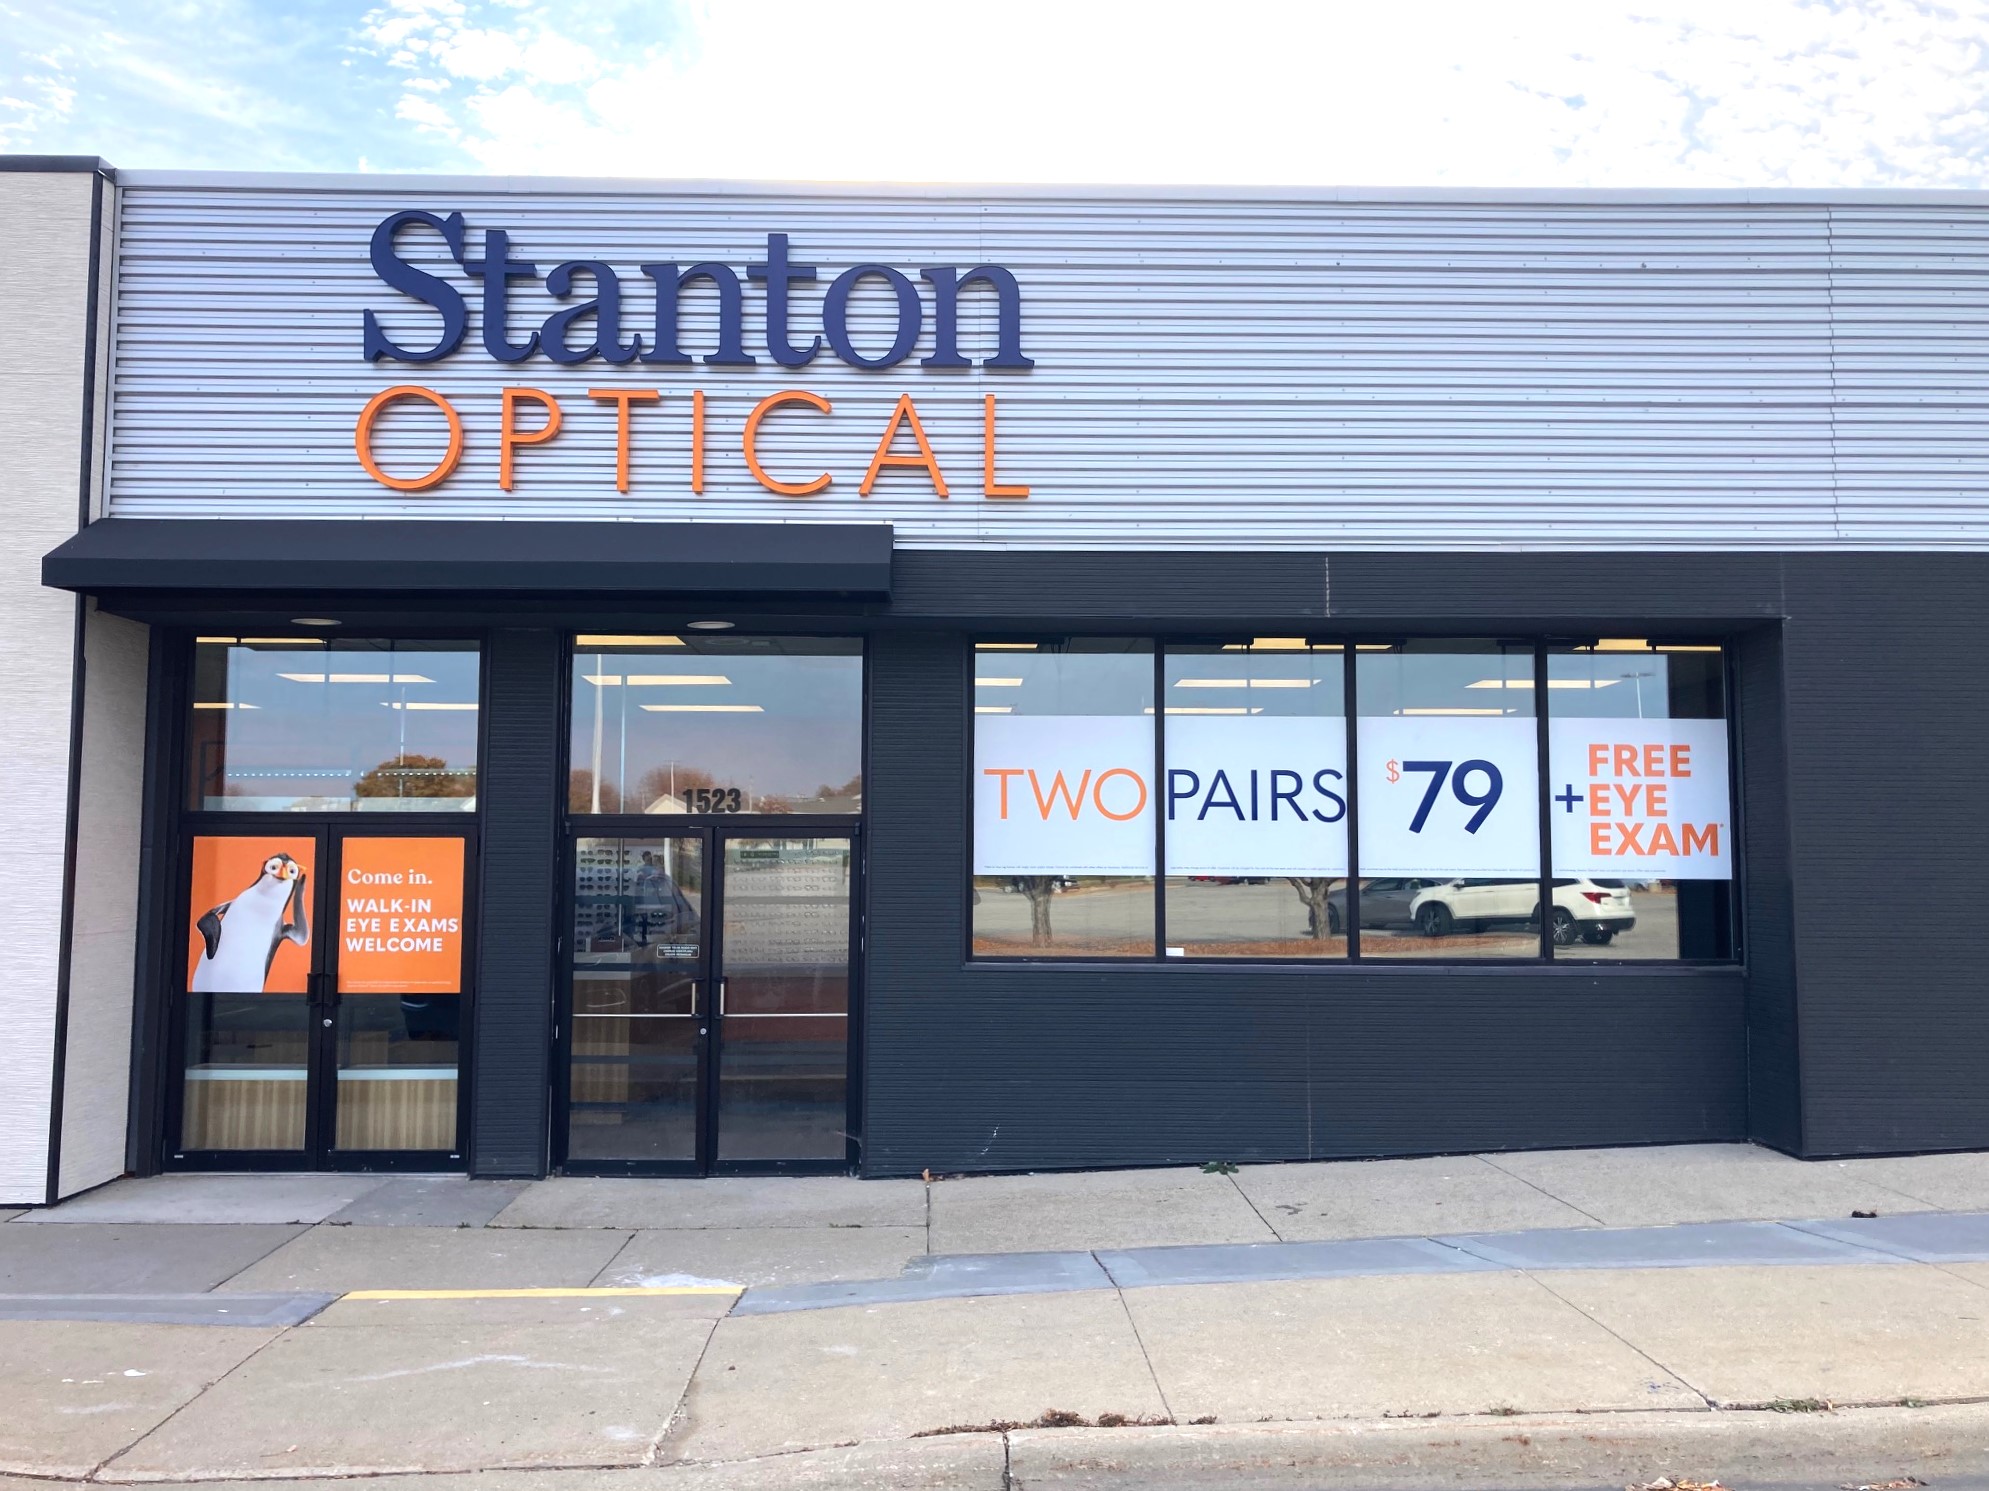 Storefront at Stanton Optical store in Waterloo, IA 50702